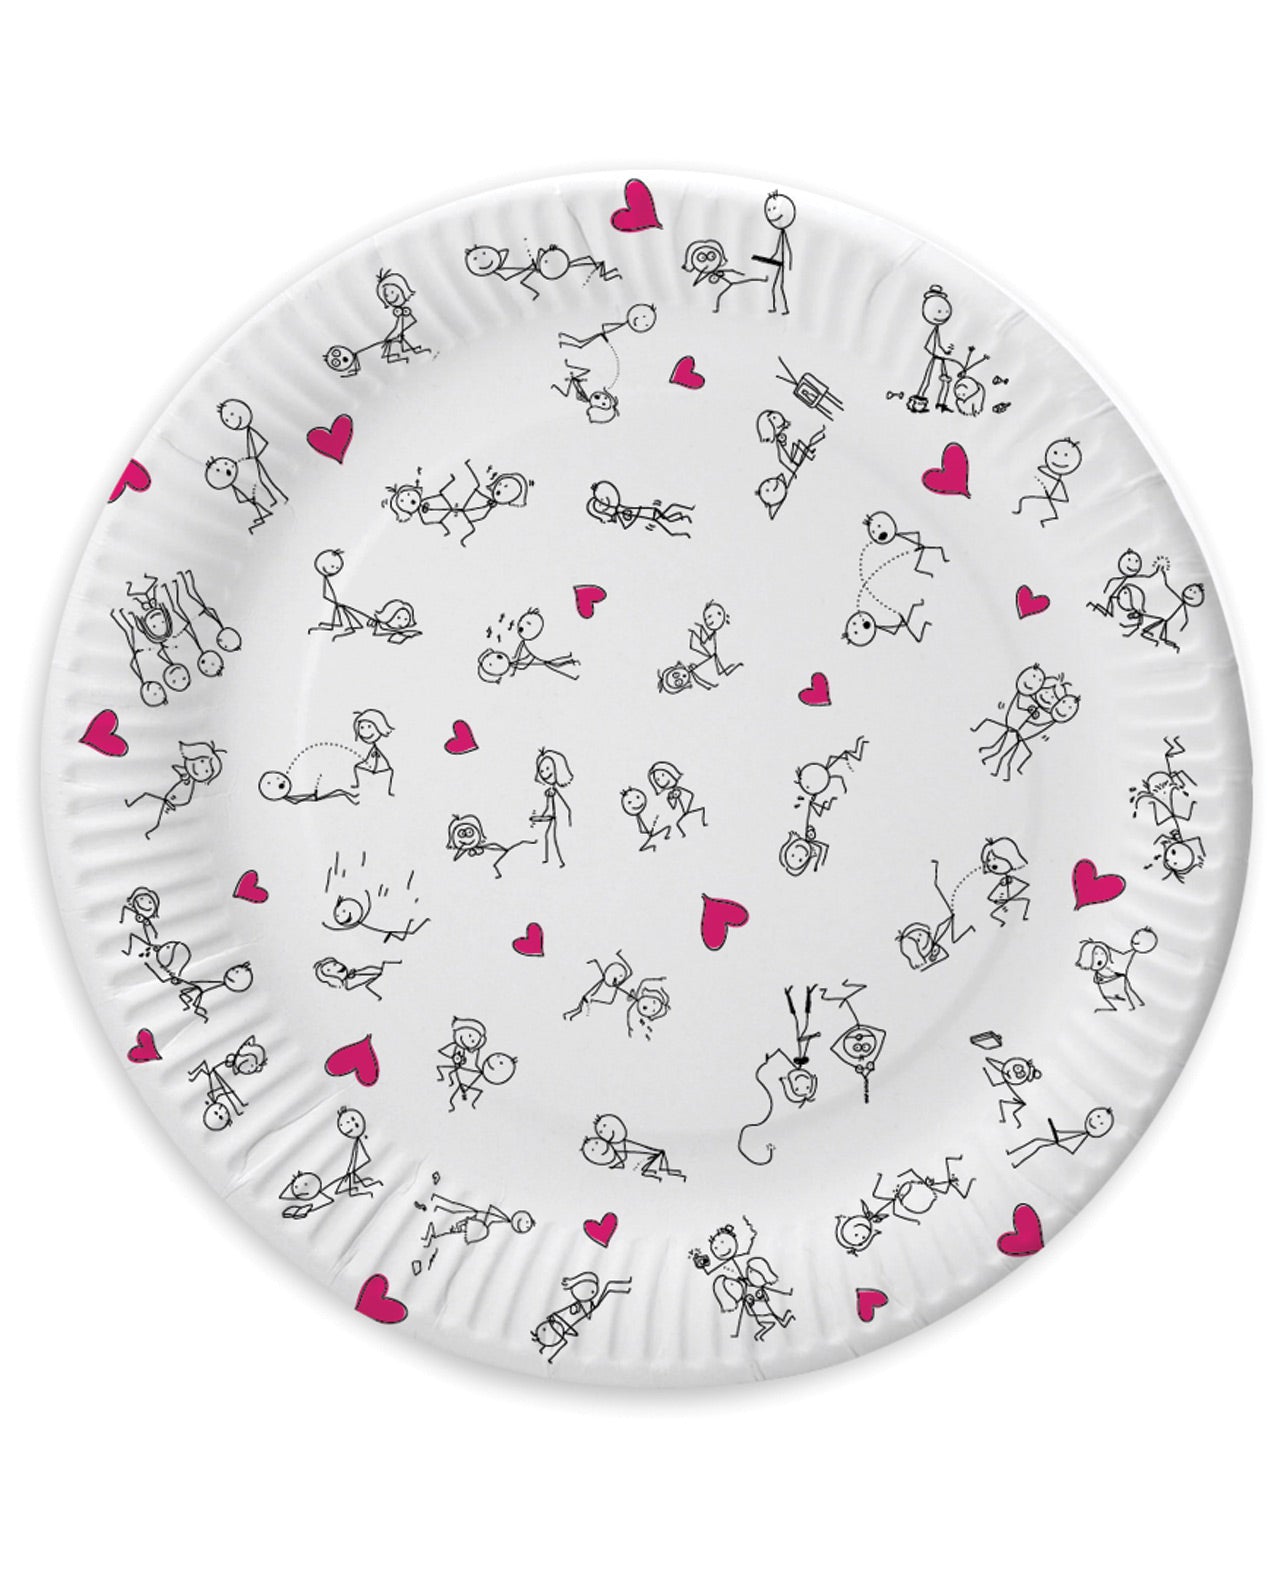 7" Dirty Dishes Position Plates - Bag of 8